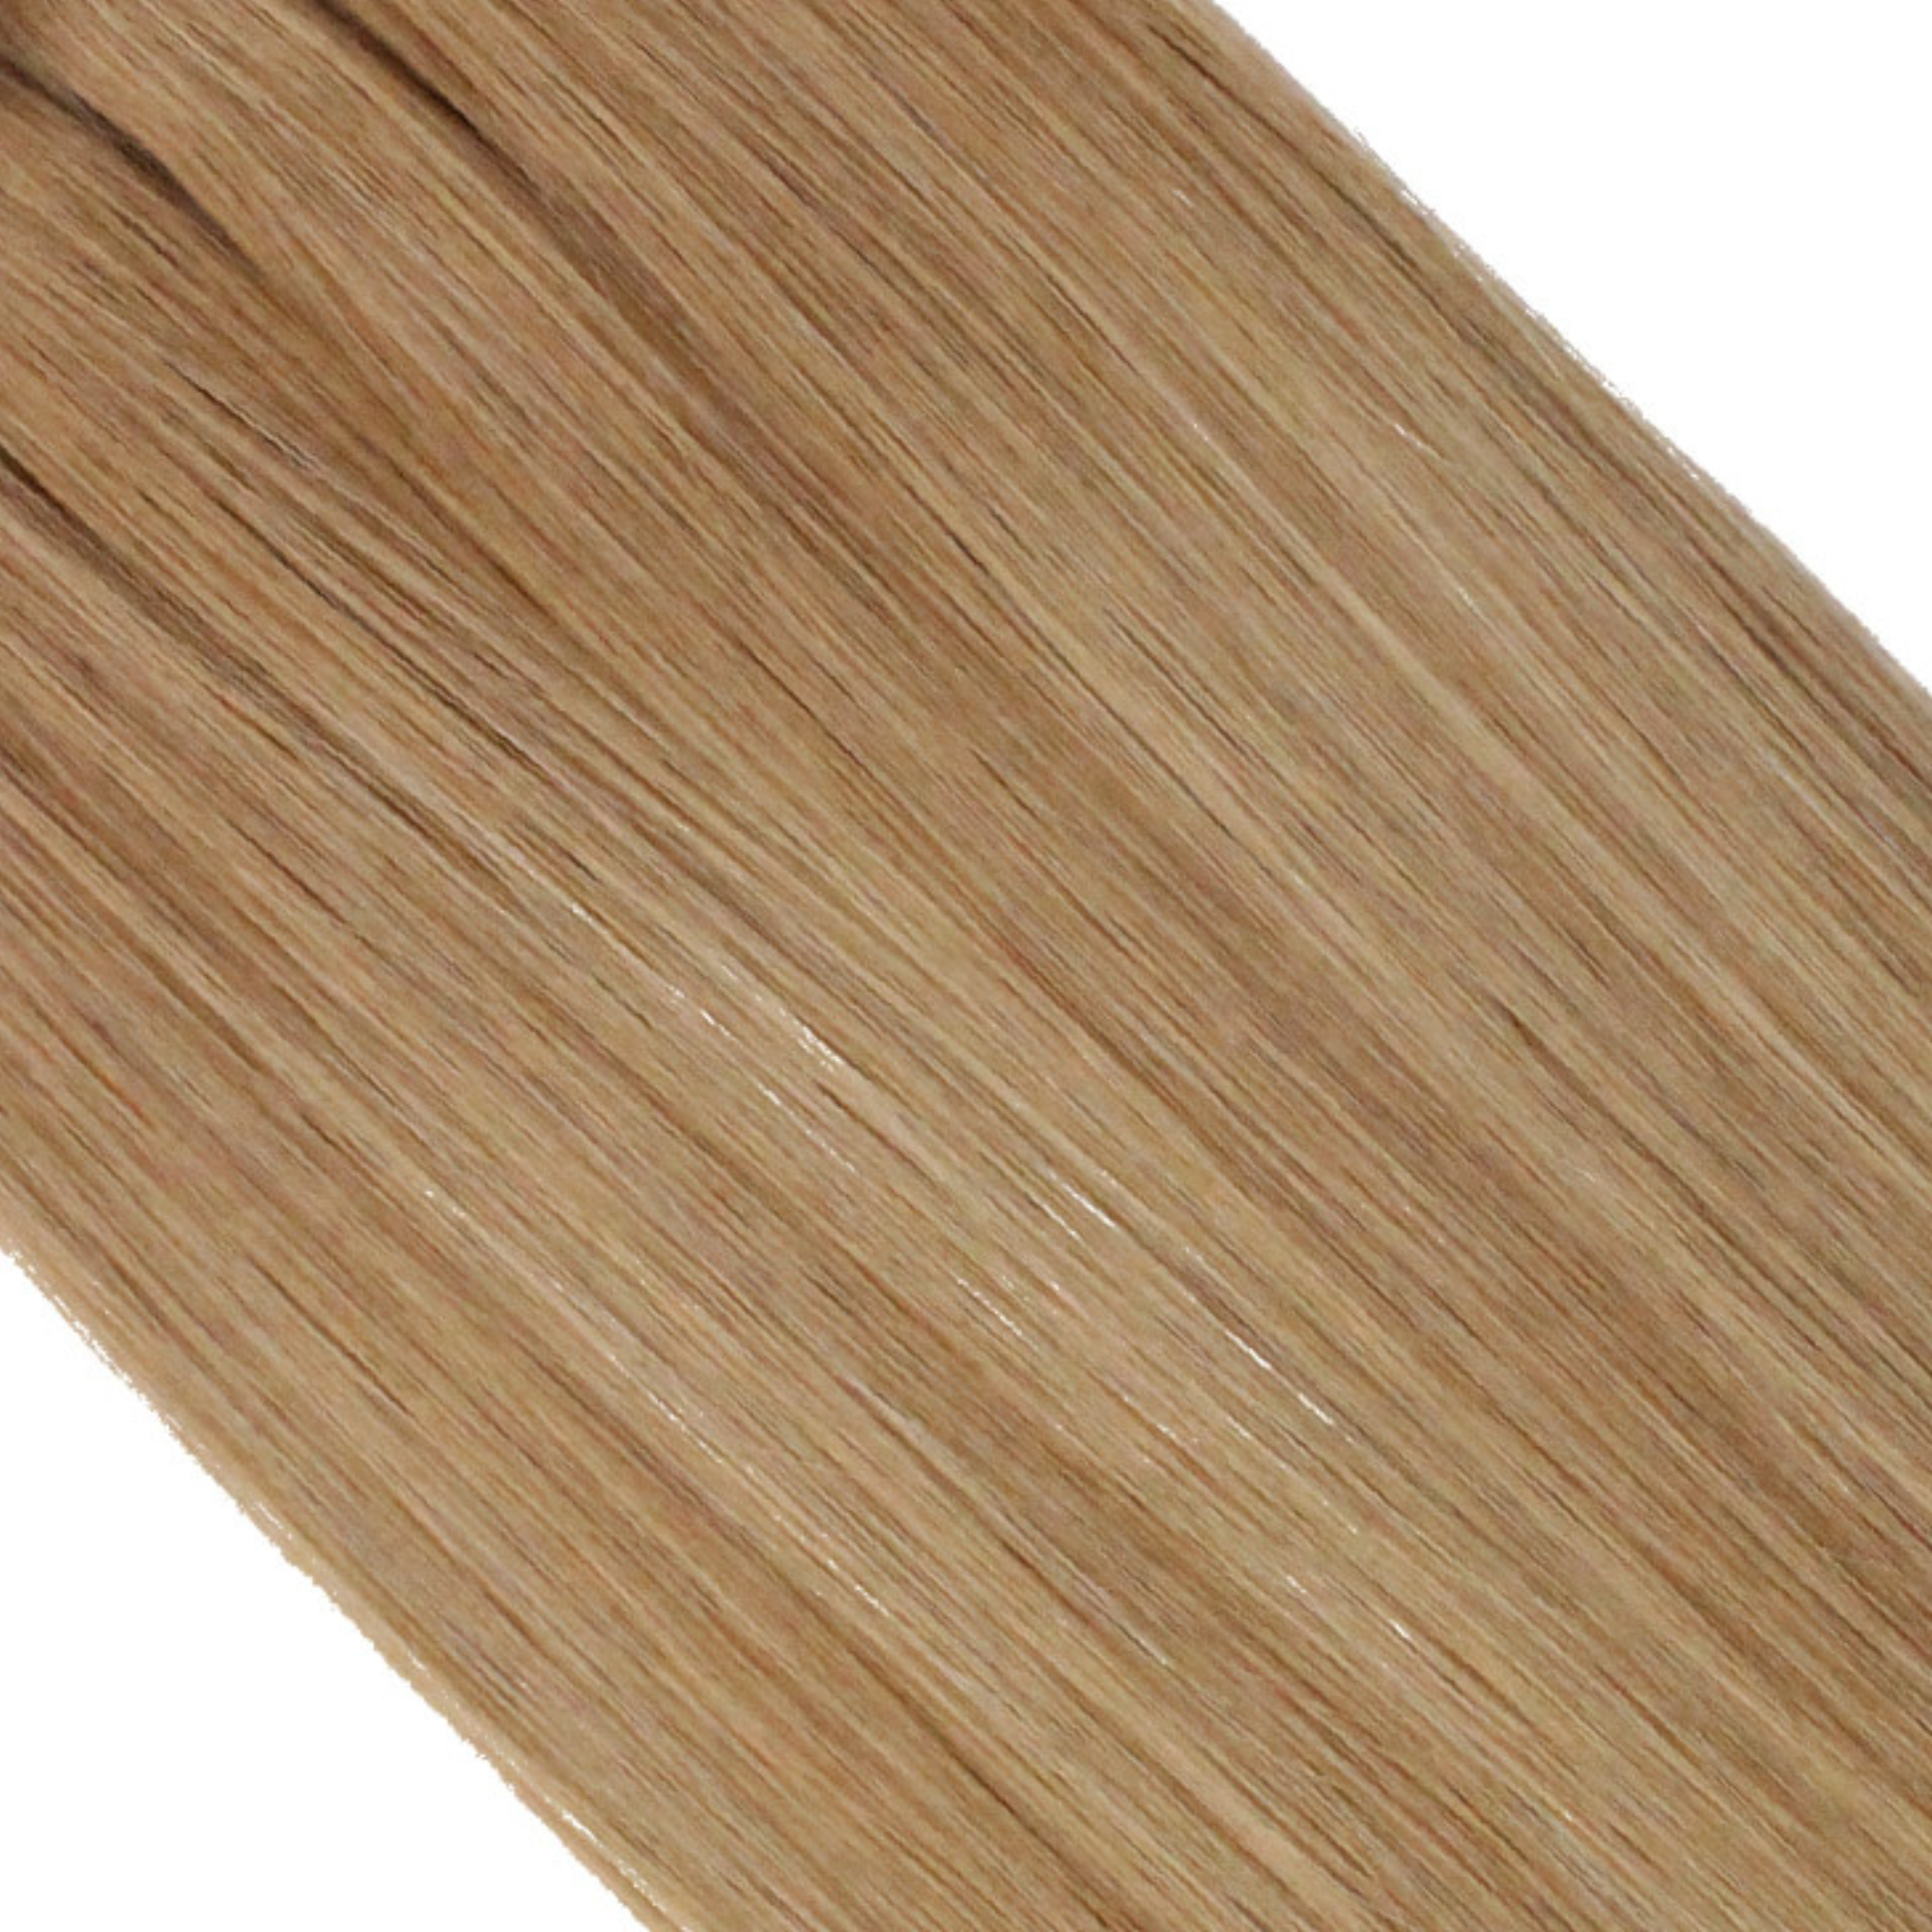 "hair rehab london 22" weft hair extensions shade swatch titled rooted mocha"